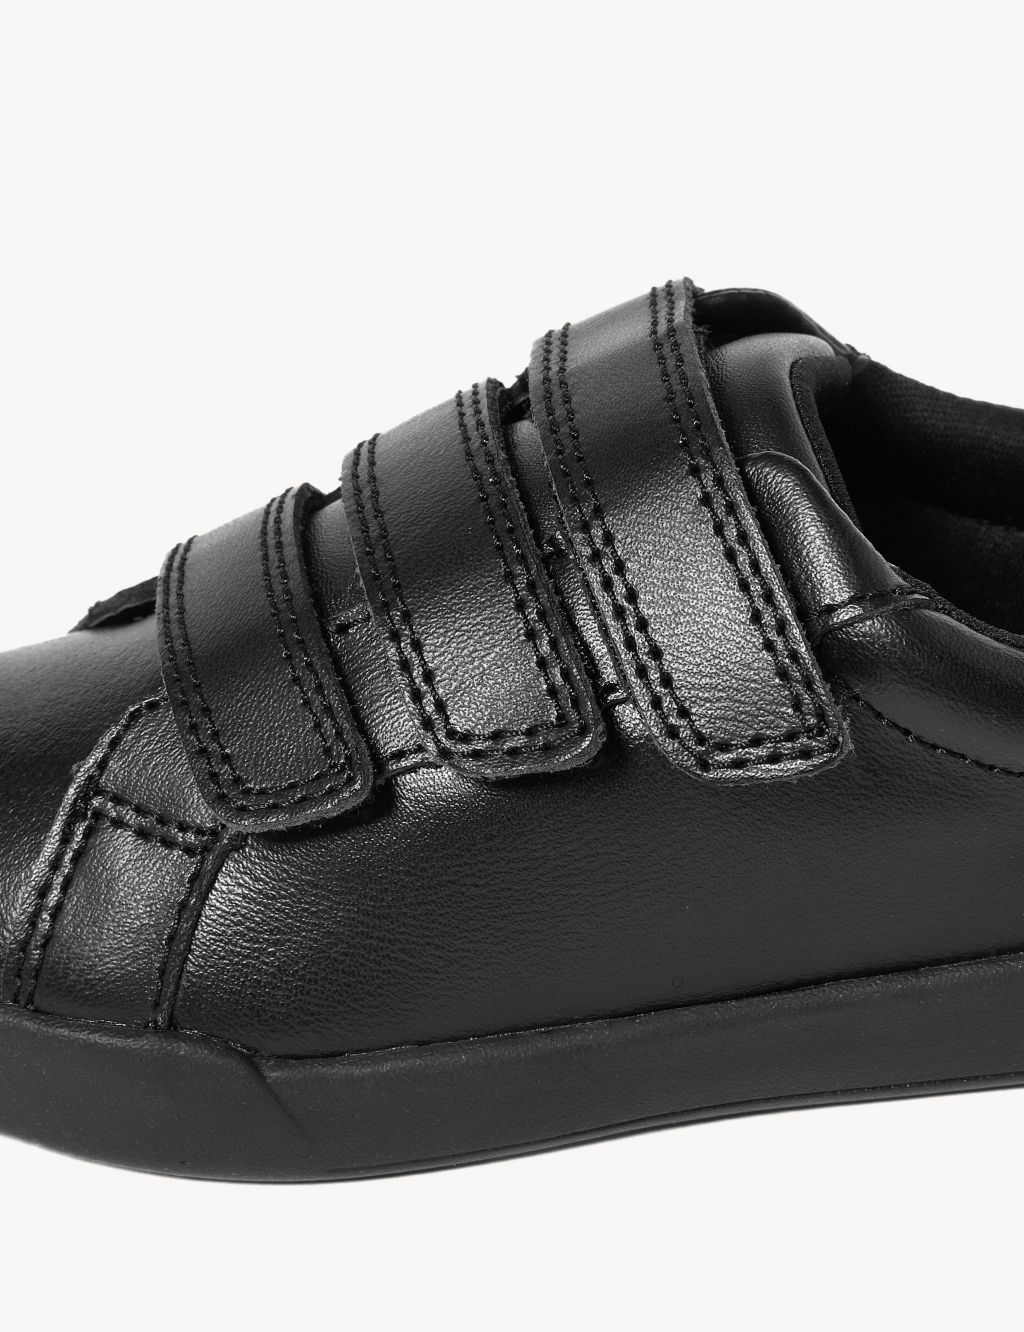 Kids' Leather Freshfeet™ Trainers (8 Small - 1 Large) image 2